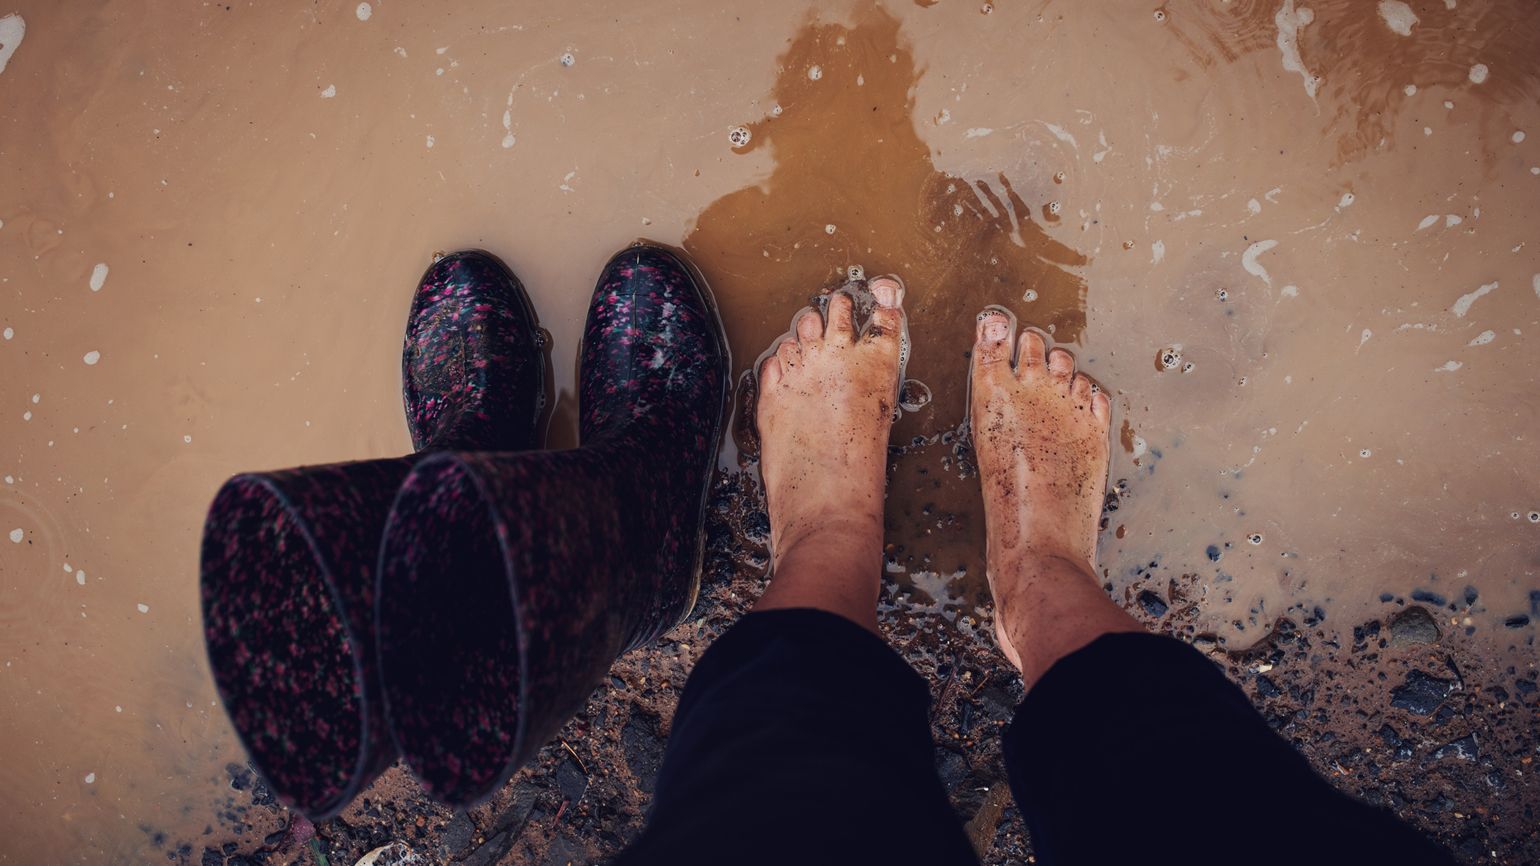 Standing in a muddy puddle; Getty Images